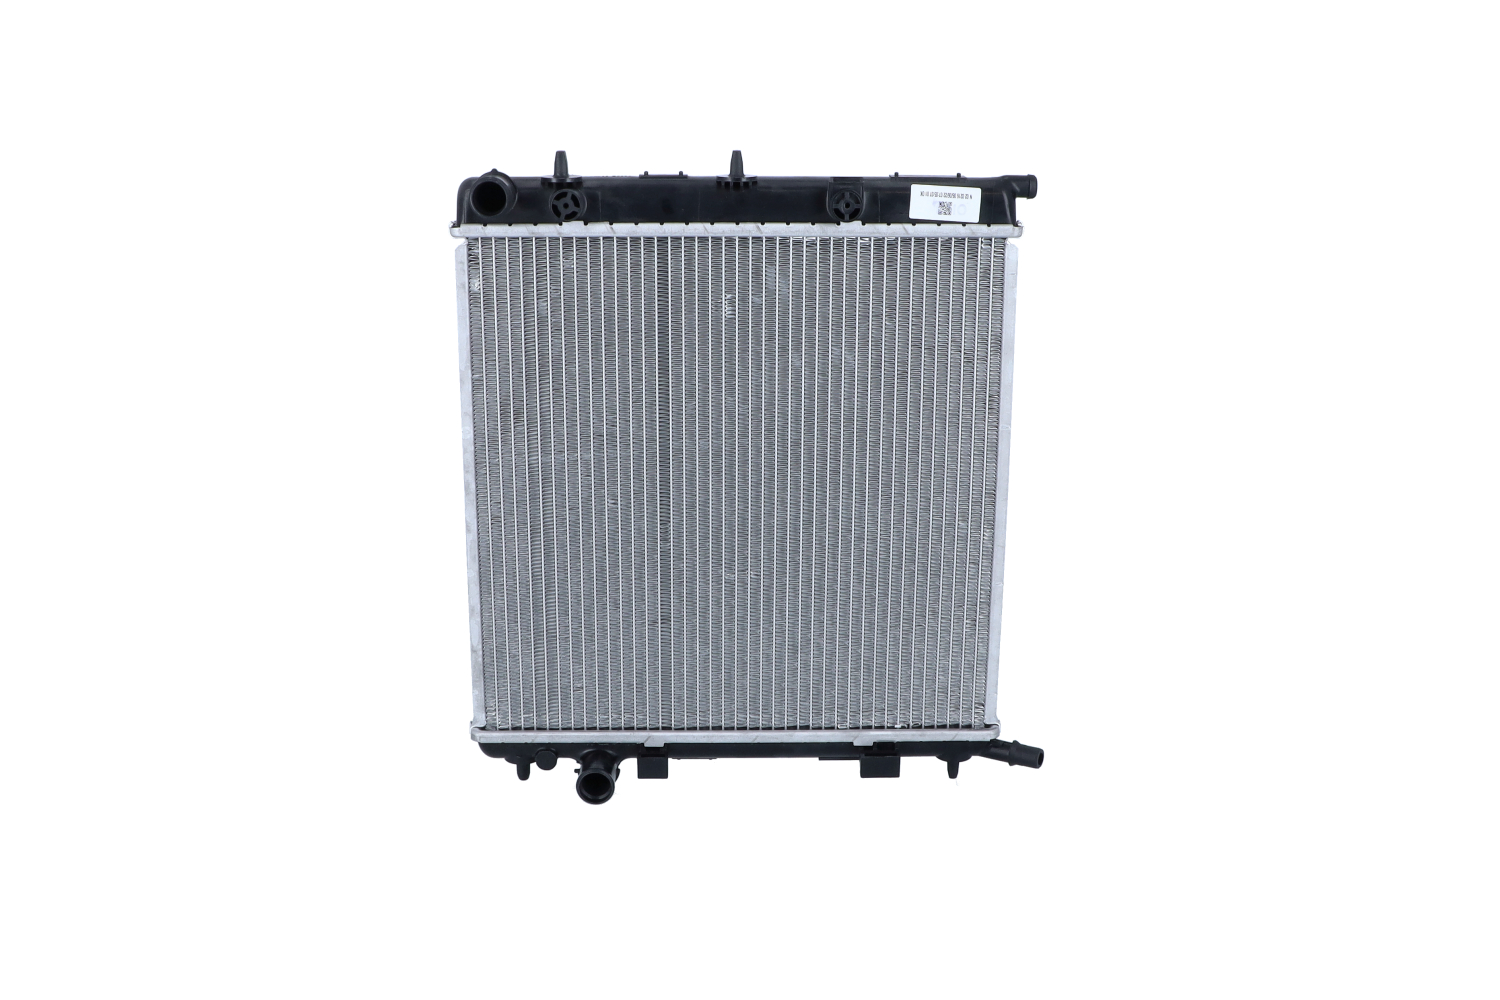 NRF 50439 Engine radiator Aluminium, 402 x 380 x 27 mm, with mounting parts, Brazed cooling fins